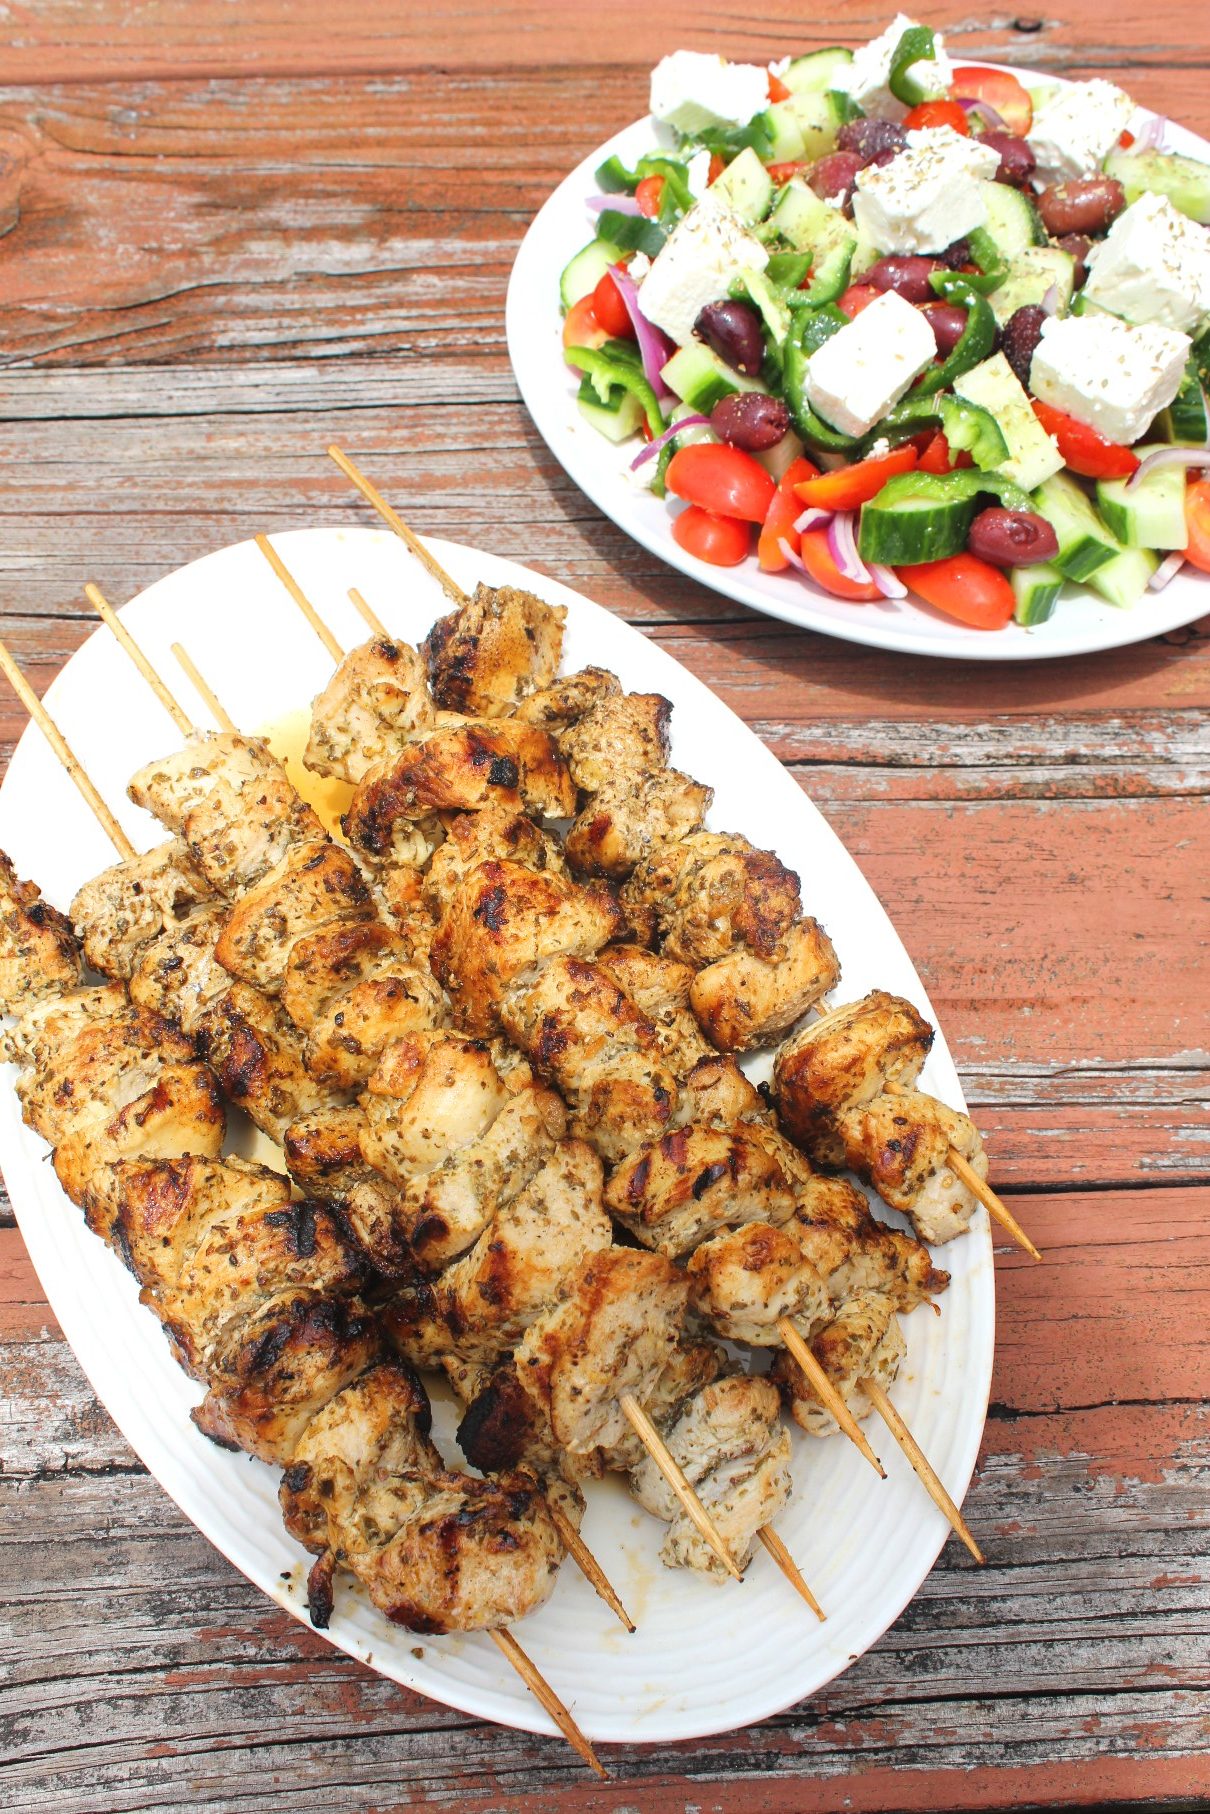 An oval platter of chicken kabobs still in skewers next to a plate of greek salad. Both plates are on a rustic looking wood surface.